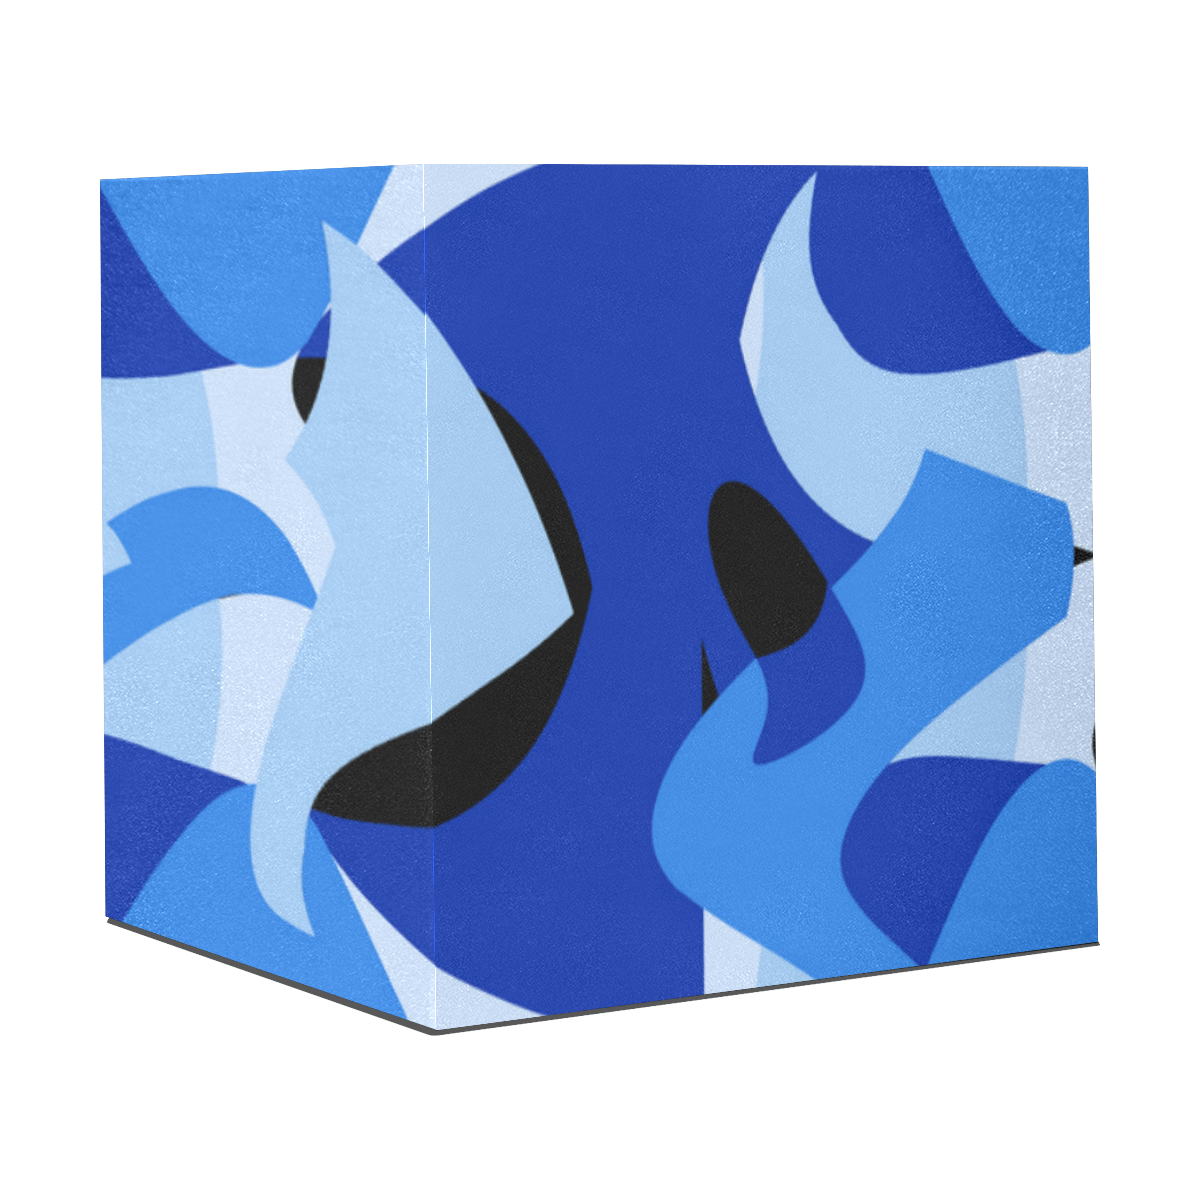 Camouflage Abstract Blue and Black Gift Wrapping Paper 58"x 23" (2 Rolls)